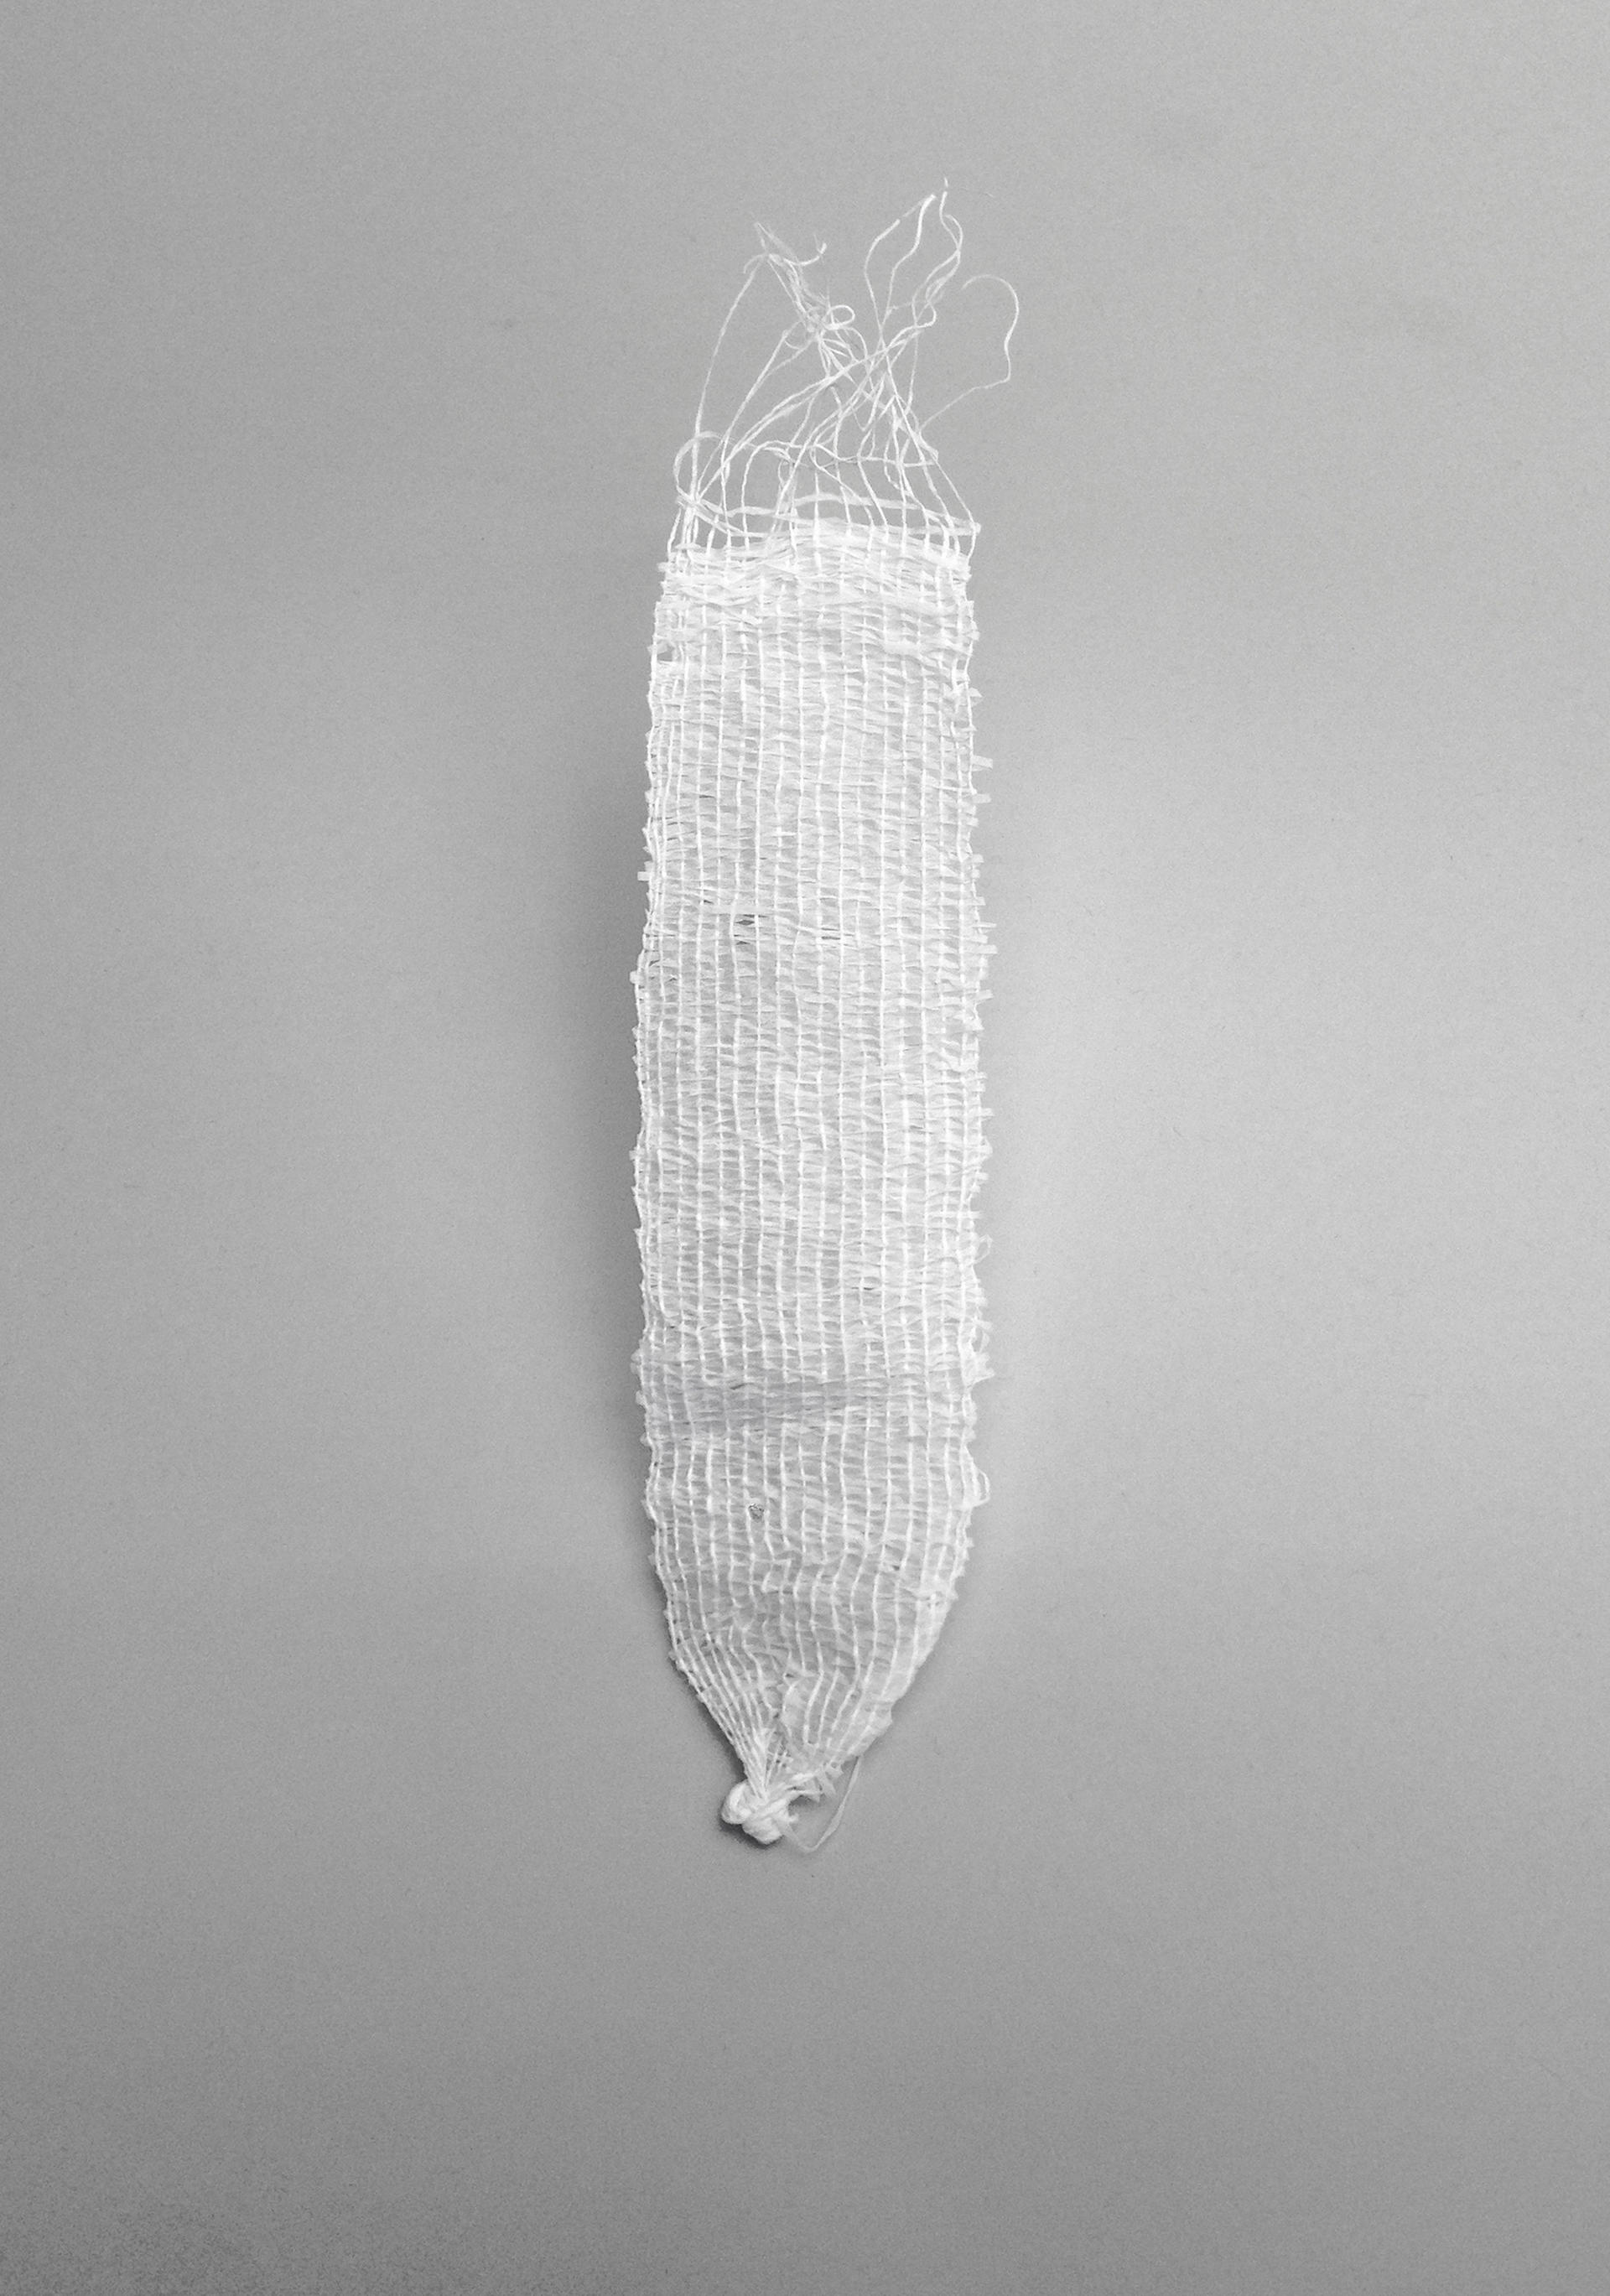 White, roughly woven strip which converges to a knot at the bottom. The top edges are frayed with loose threads.